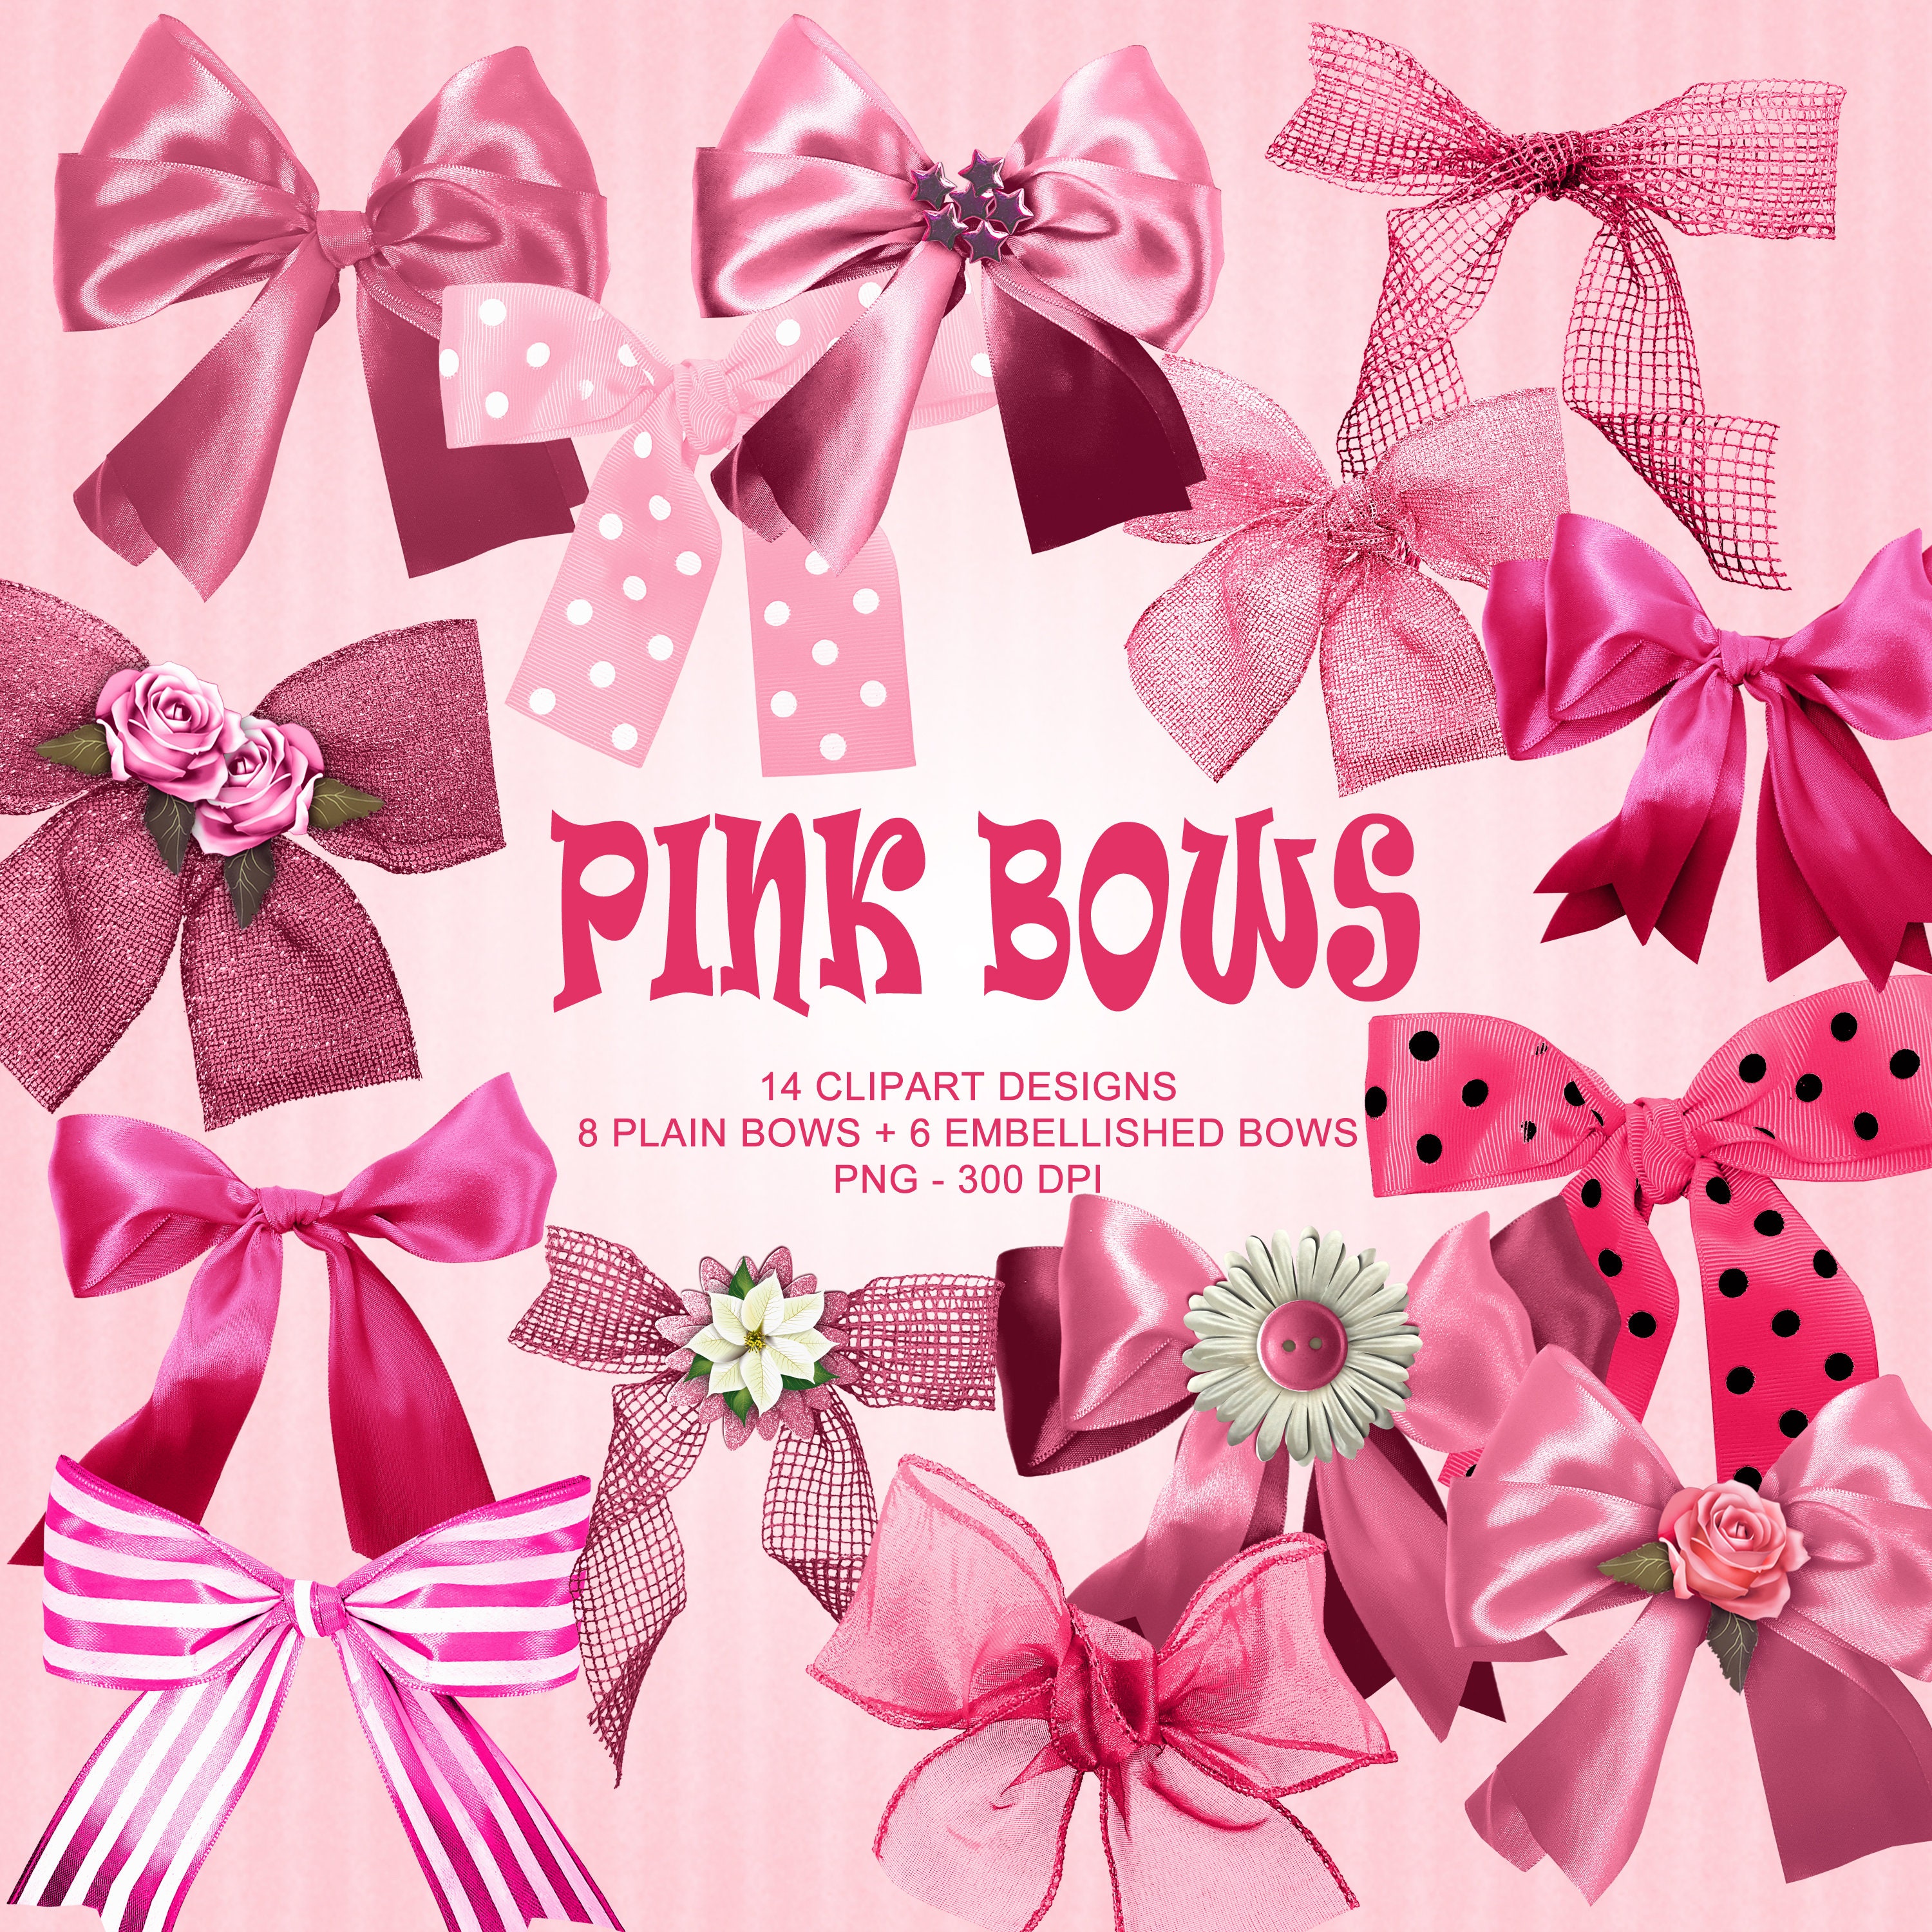 Premade Pink Bows, Hot Pink Satin Bows - Pre-Tied - 1 3/8in. - 50  Pieces/Pkg. (pm601333)